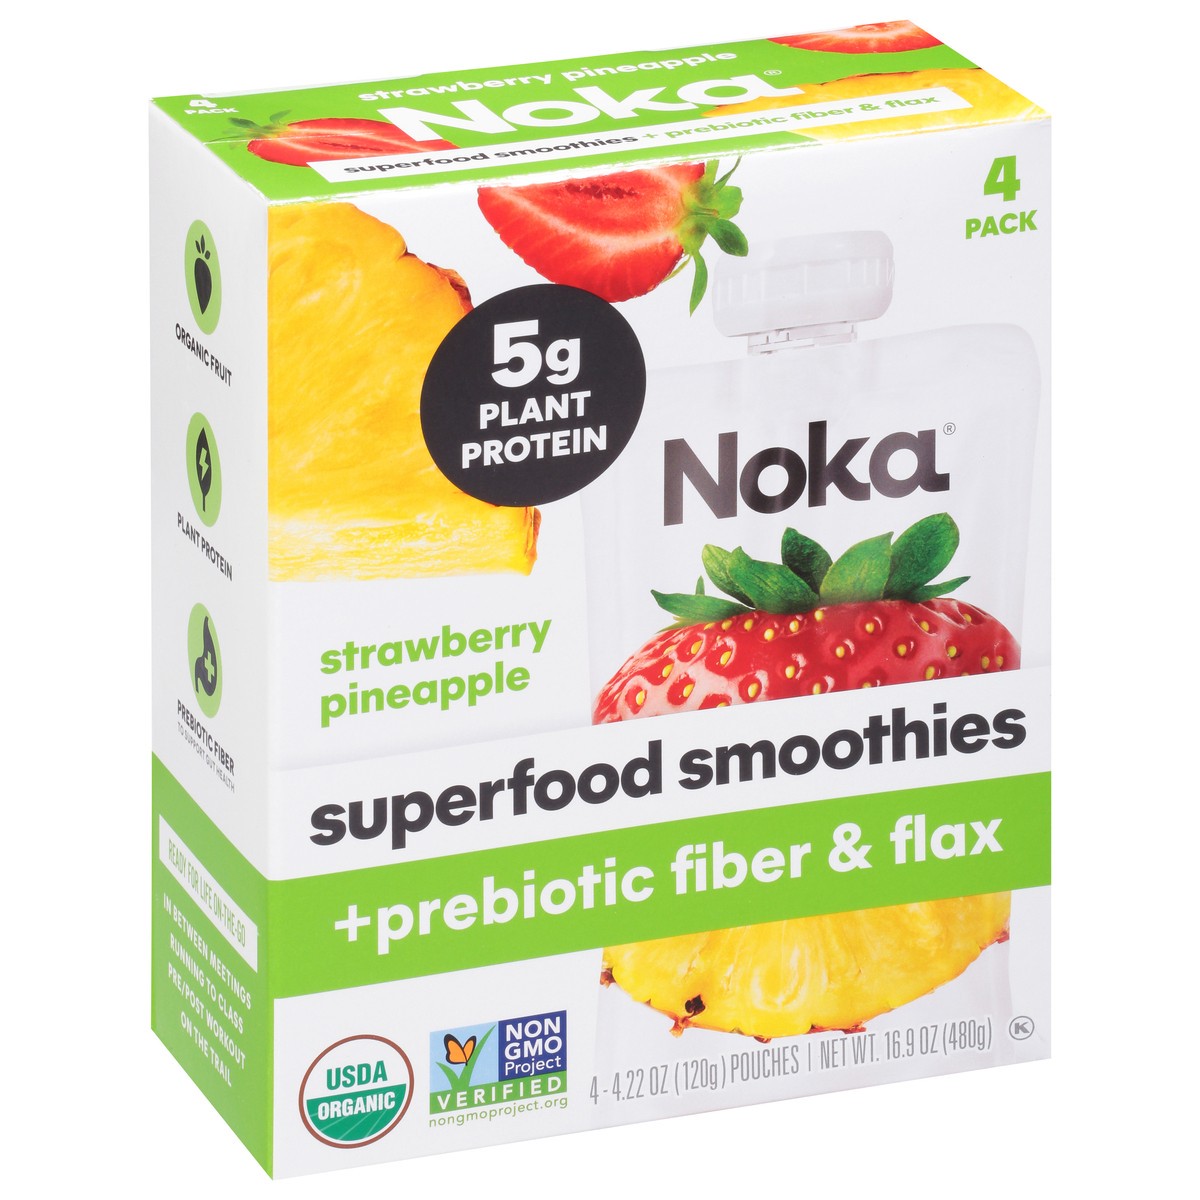 slide 2 of 14, NOKA 4 Pack Strawberry Pineapple Superfood Smoothies 4 - 4.22 oz Pouches, 4 ct